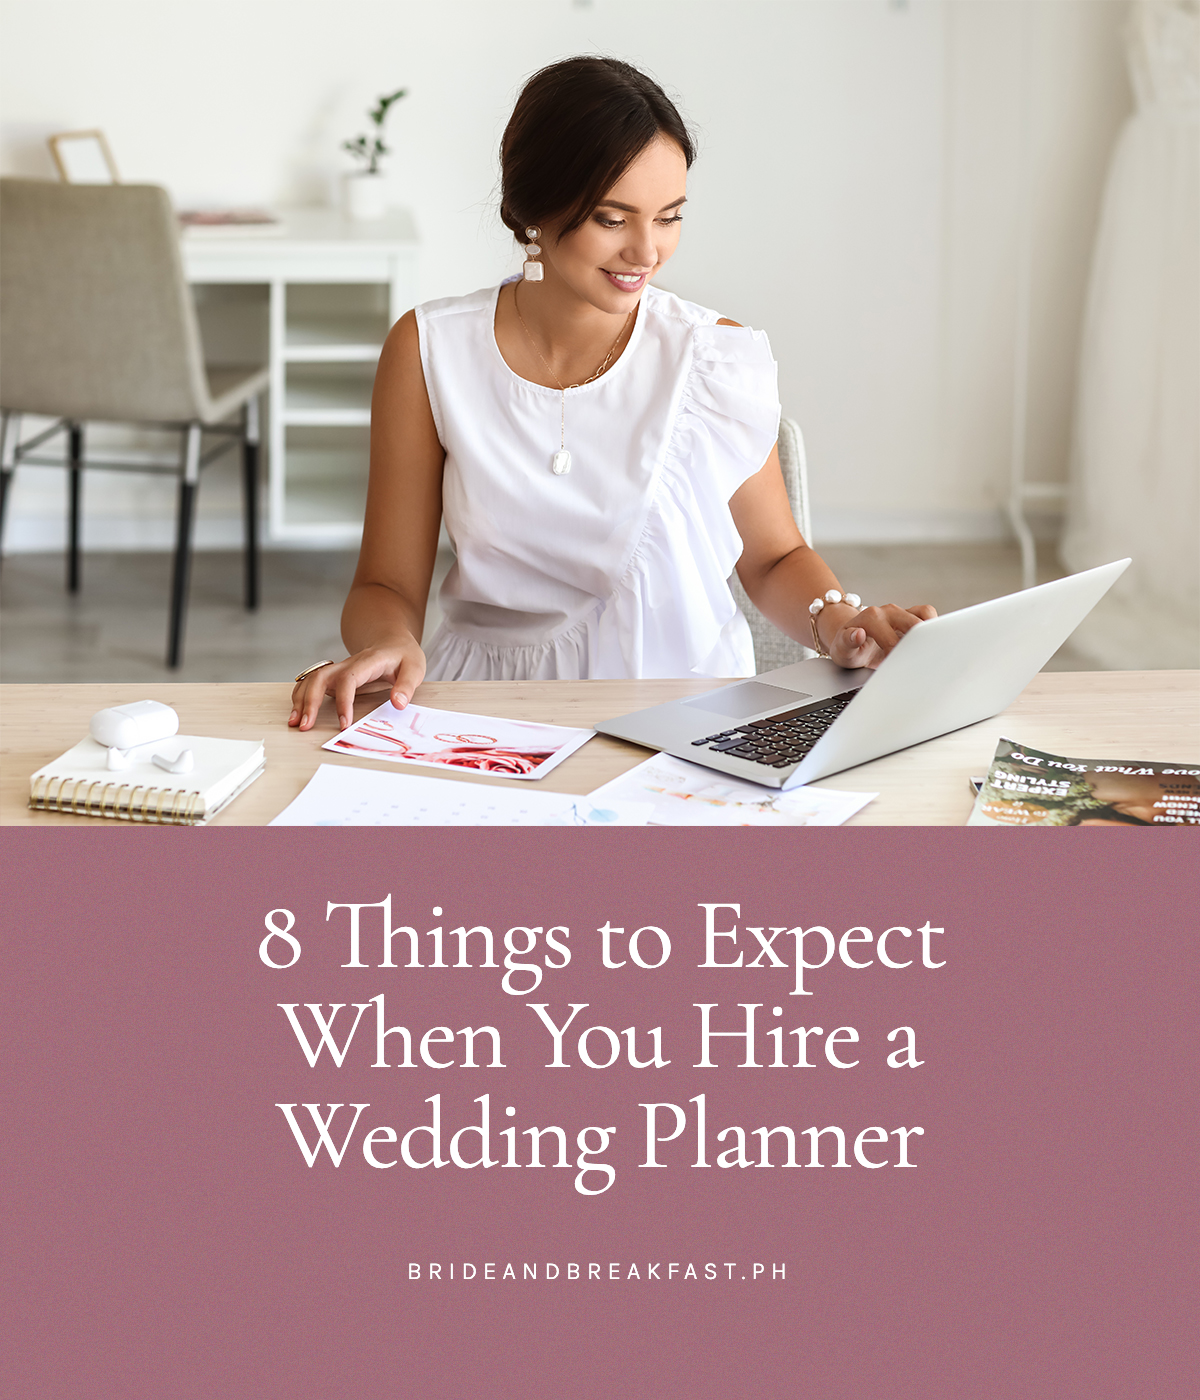 8 Things to Expect When You Hire a Wedding Planner